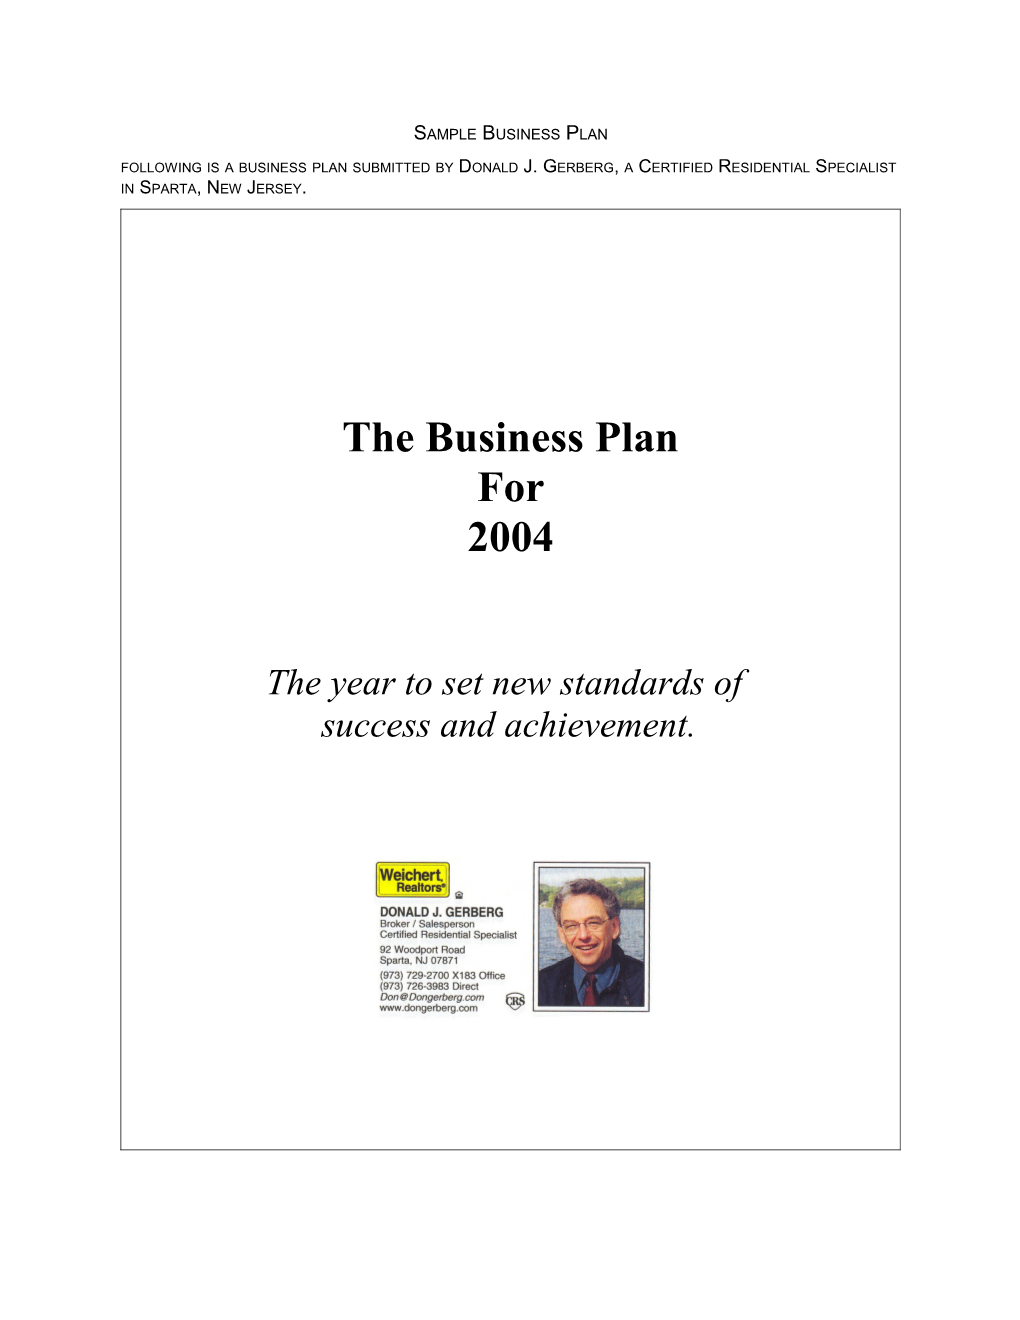 Following Is a Business Plan Submitted by Donald J. Gerberg, a Certified Residential Specialist